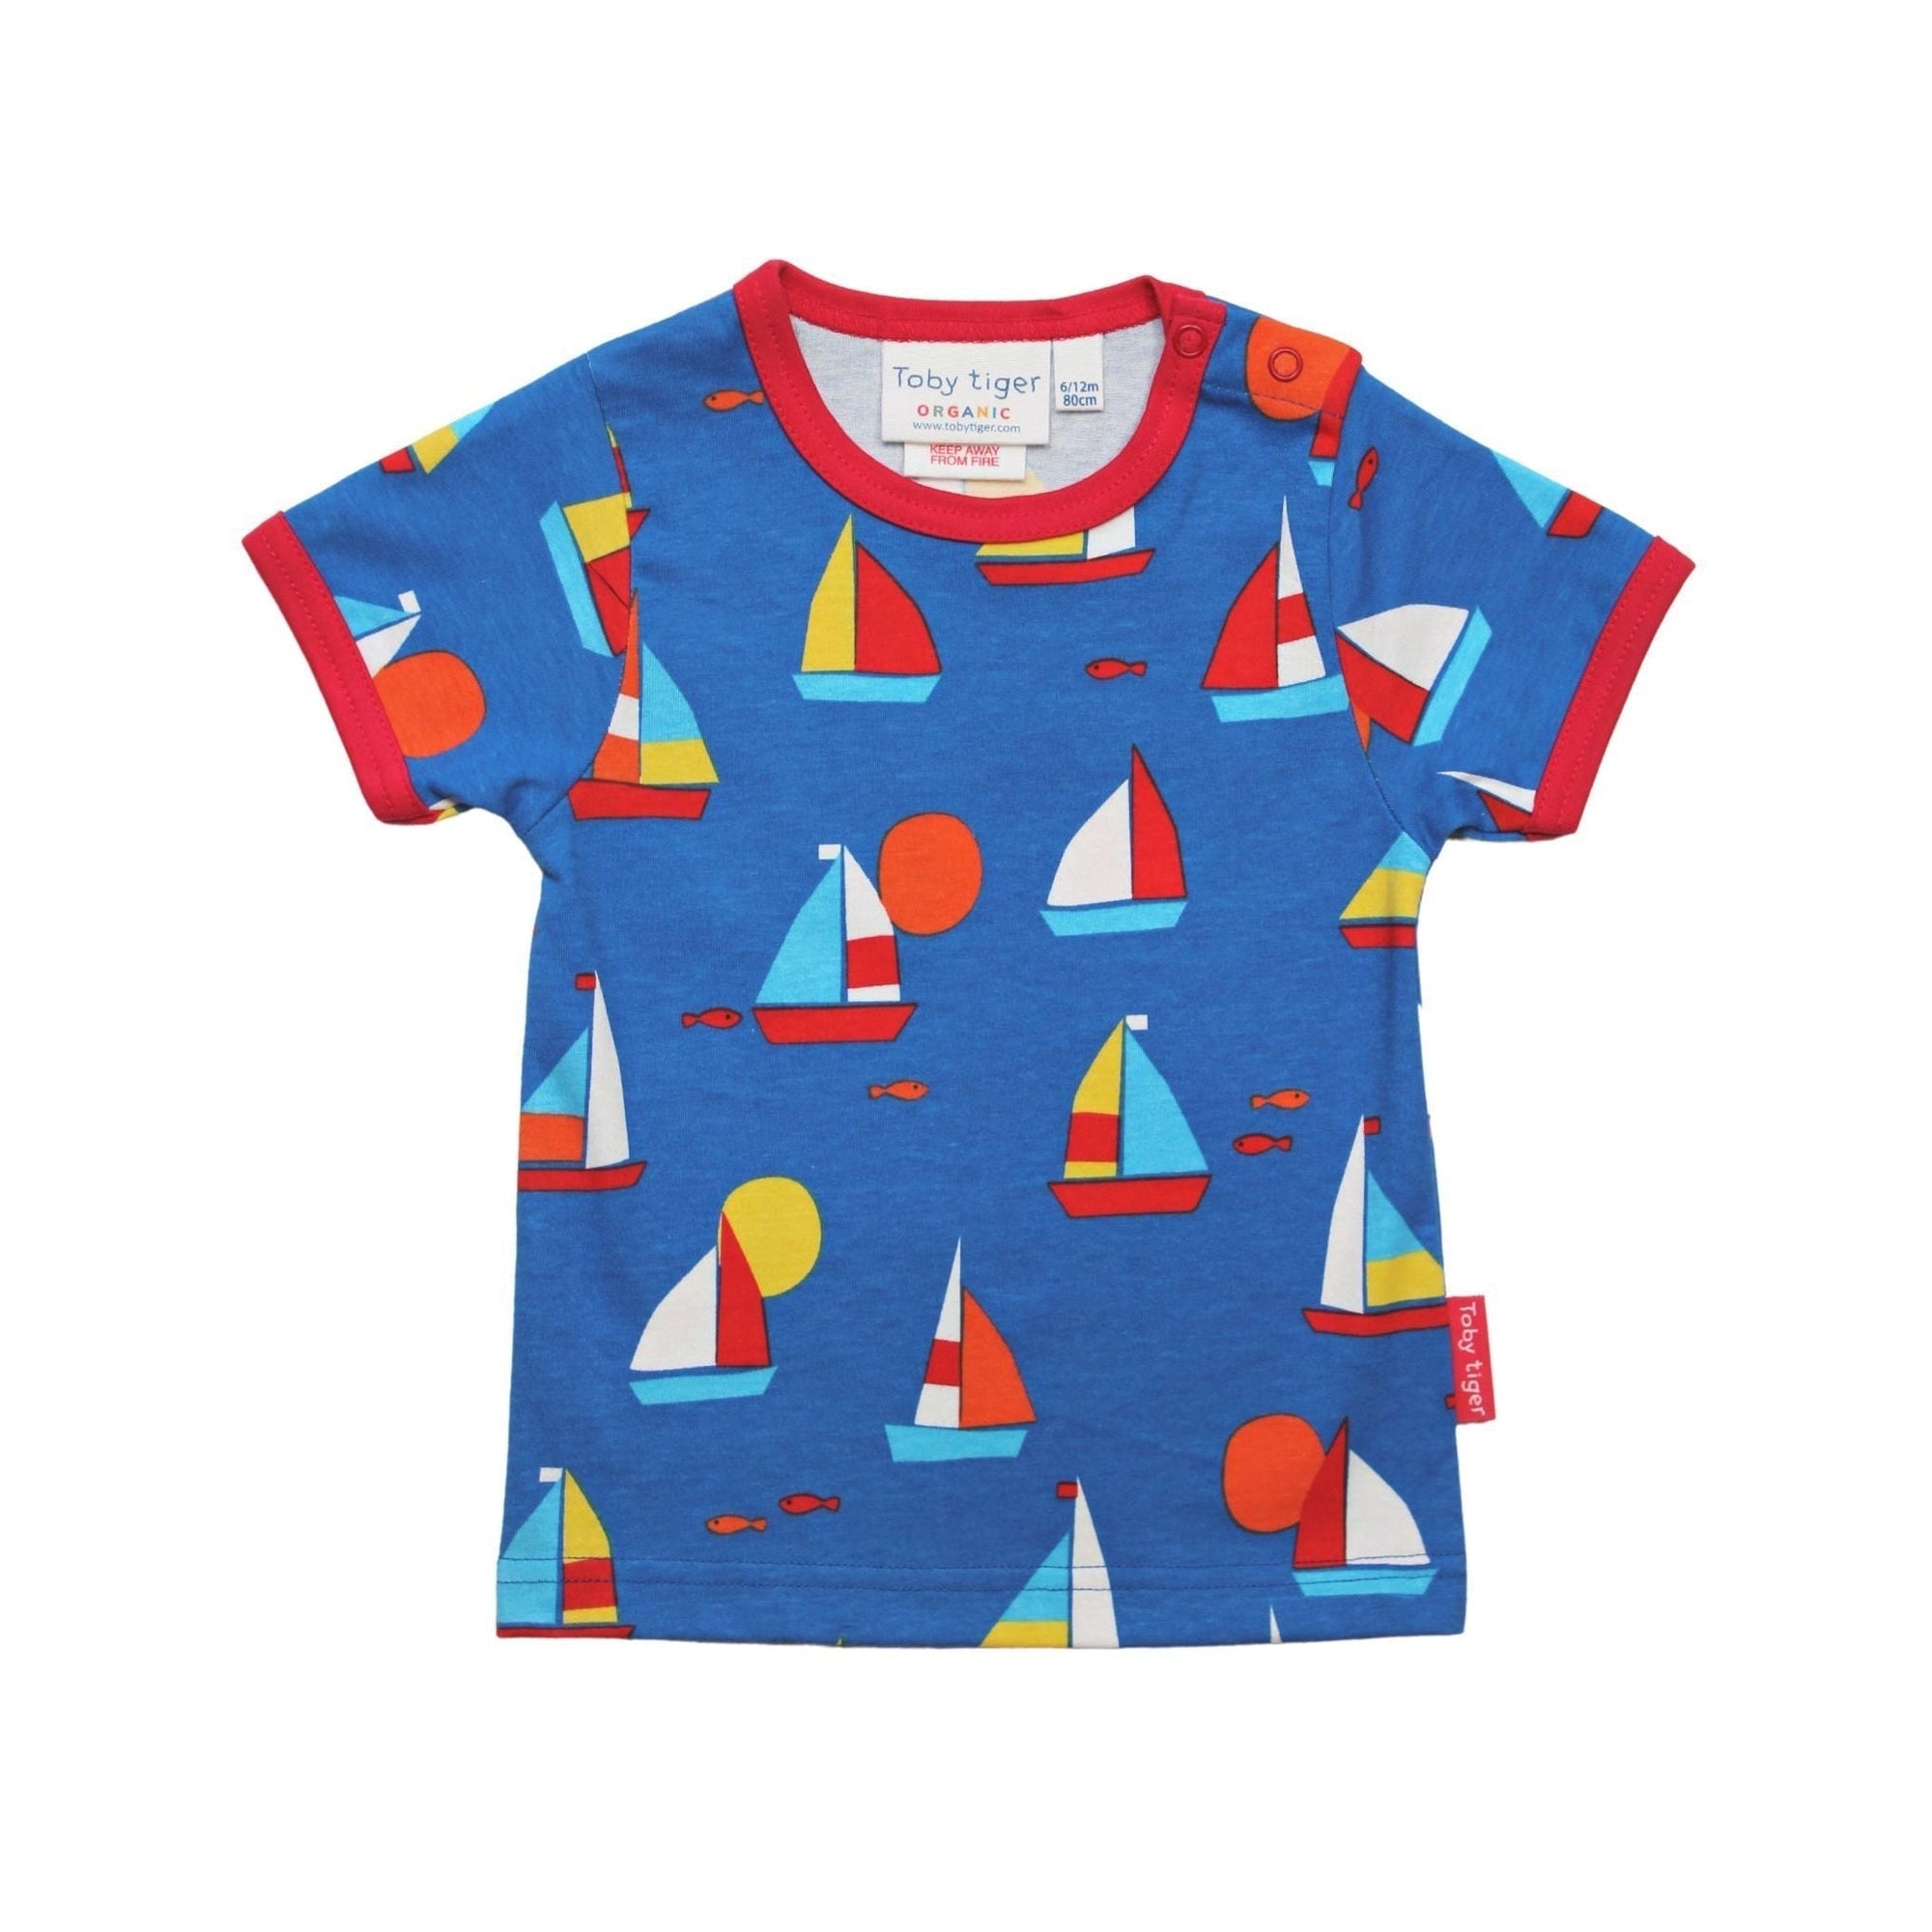 Sailboat Short Sleeve Shirt - 1 Left Size 6-7 years-Toby Tiger-Modern Rascals